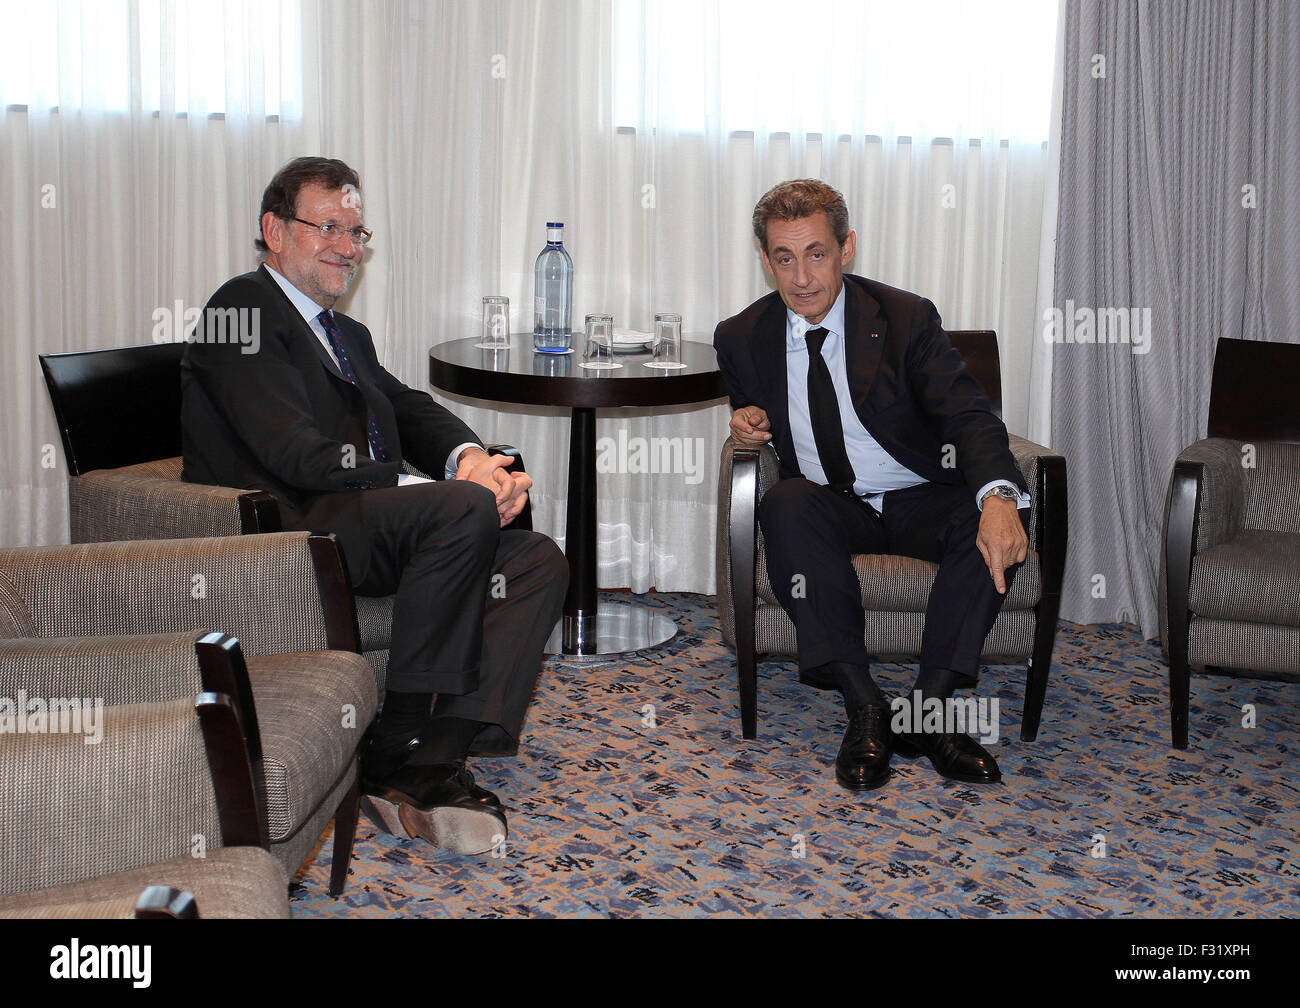 BARCELONA, SPAIN - SEPTEMBER 25: French former president Nicolas Sarkozy (R) and Spanish Prime Minister Mariano Rajoy (C) smile as they pose before the Catalonia's Popular Party (PP) final campaign meeting for the Catalan regional election, in Barcelona on September 25, 2015. Catalonia goes to the poles on September 27 with today ending one of the most intense electoral campaign ever known in post-Franco Spain as Catalonia plays its independence. in Barcelona, Spain, Friday, Sept. 25, 2015. Catalans vote Sunday in regional parliamentary elections that the breakaway camp hopes will give them a Stock Photo